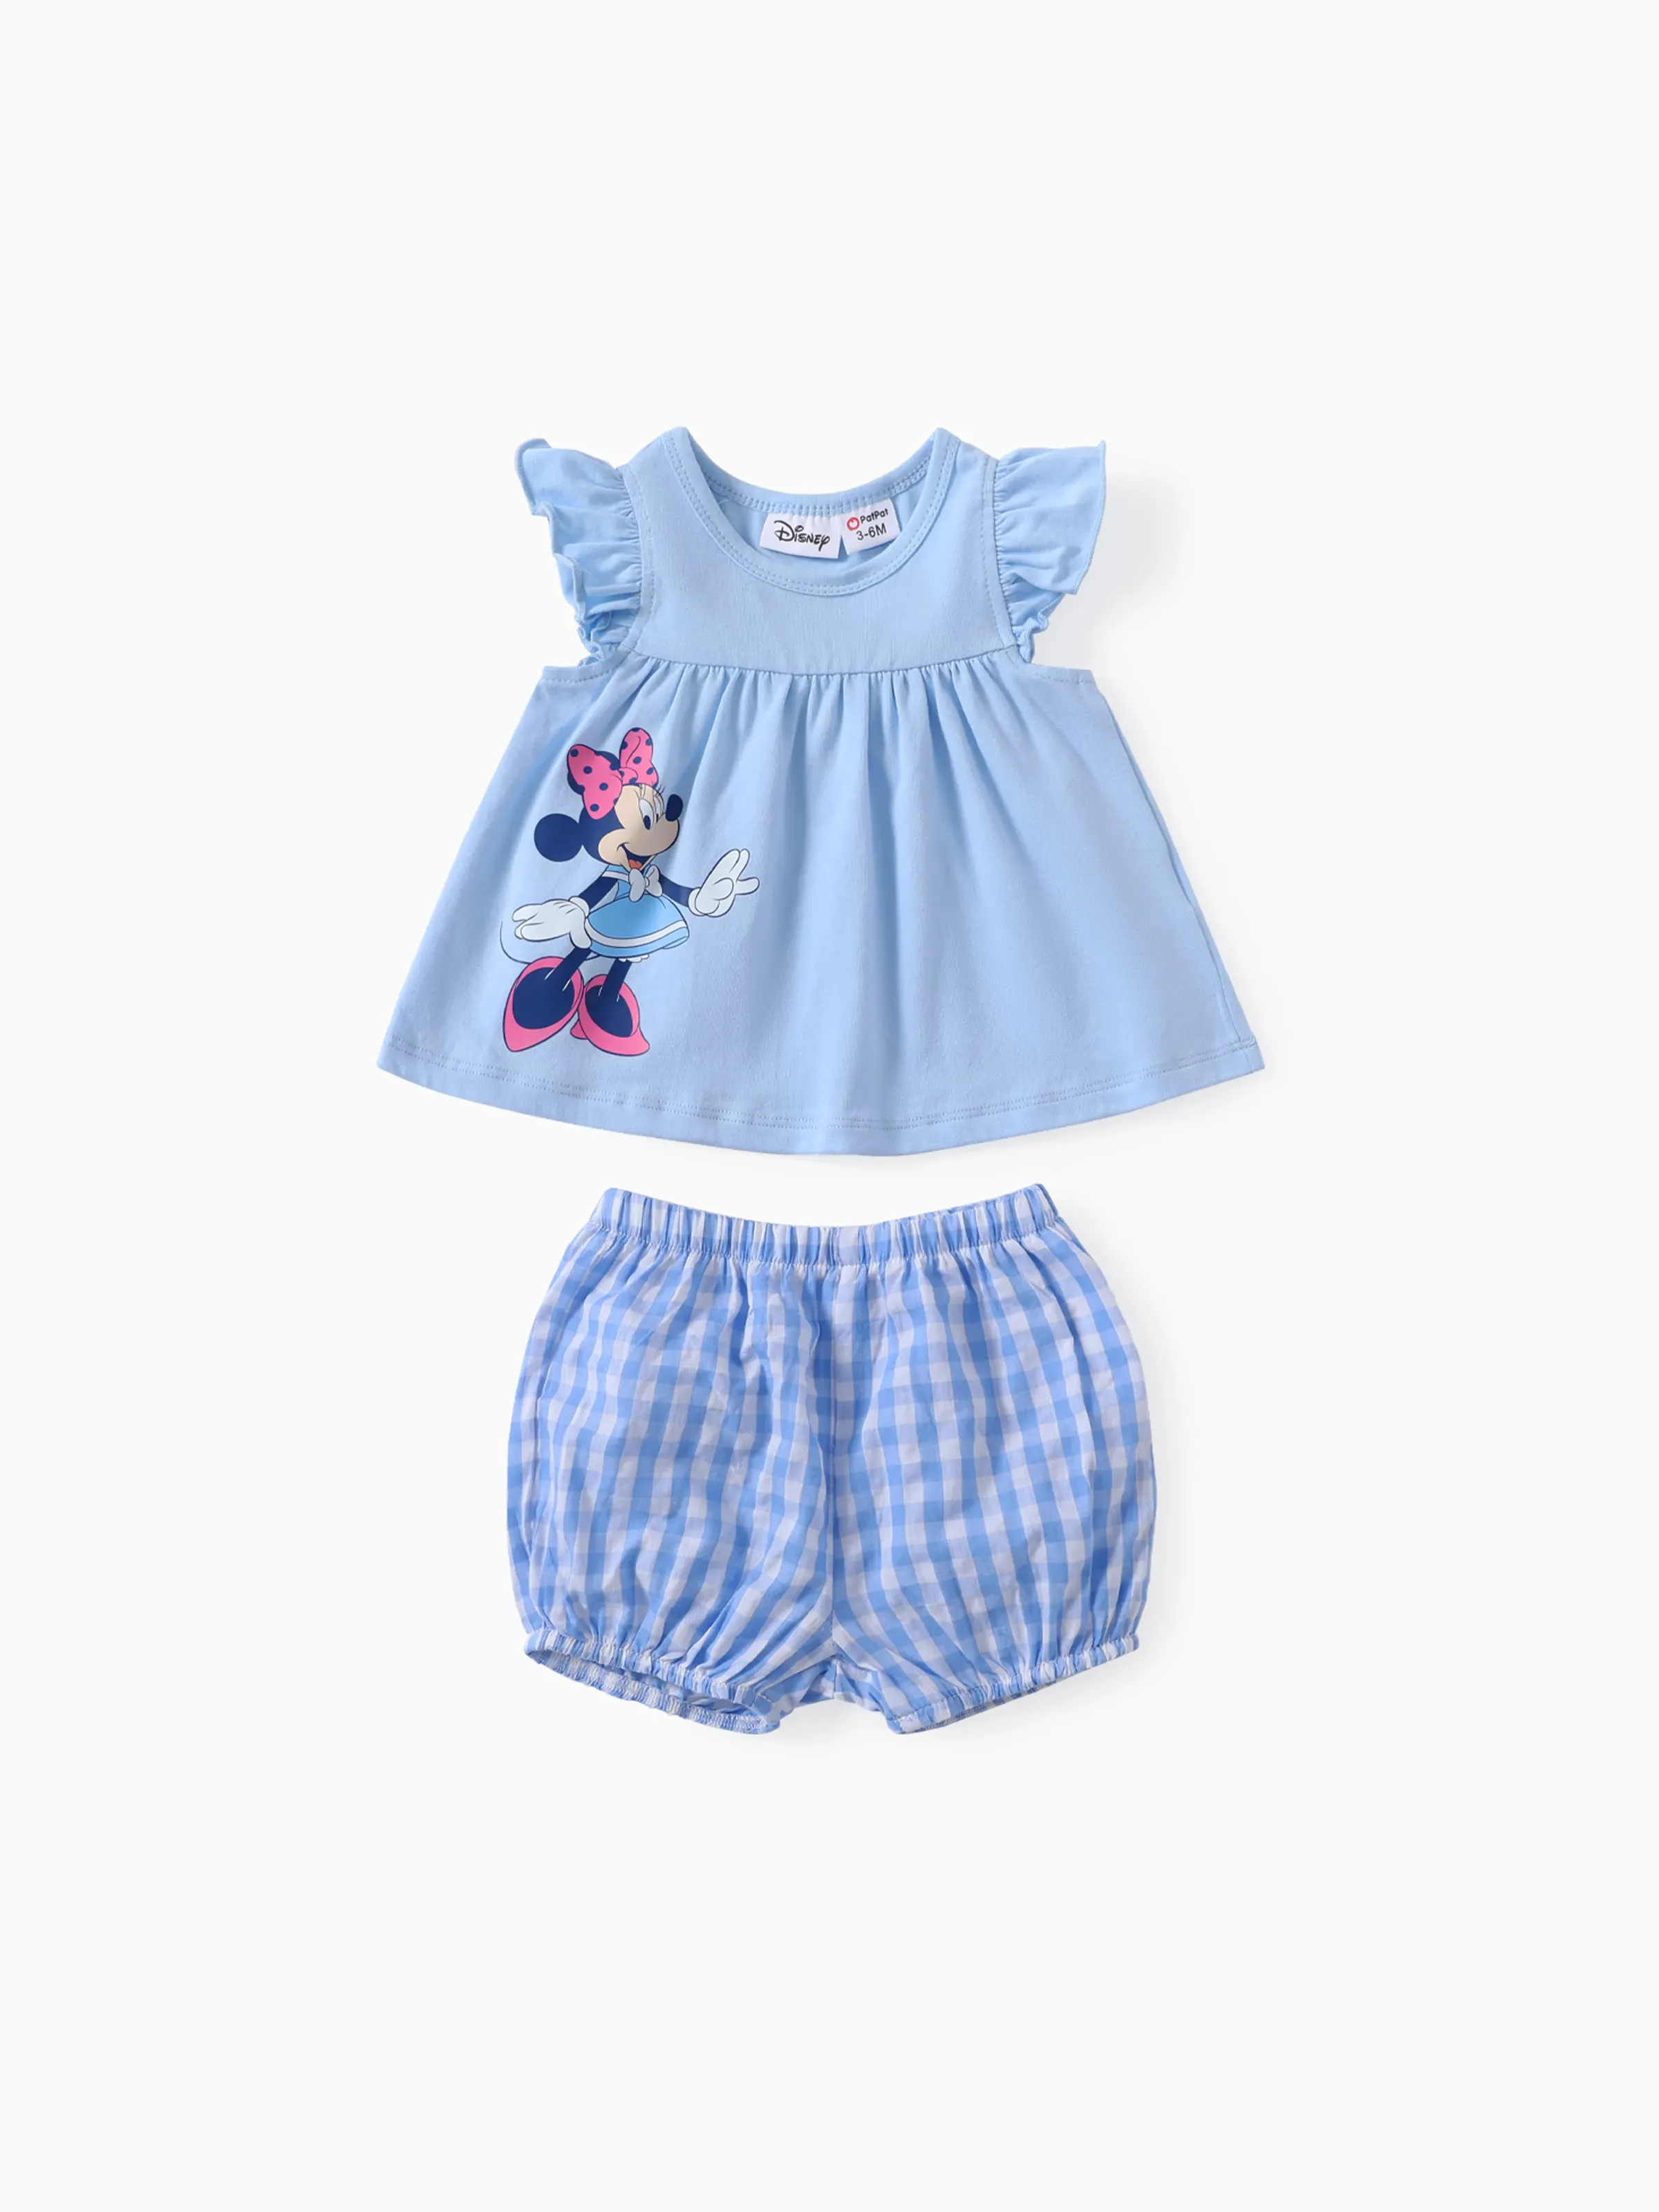 

Disney Mickey and Friends Baby/Toddler Girls 2pcs Cotton Character Print Ruffled-sleeve Top with Checked Shorts Set